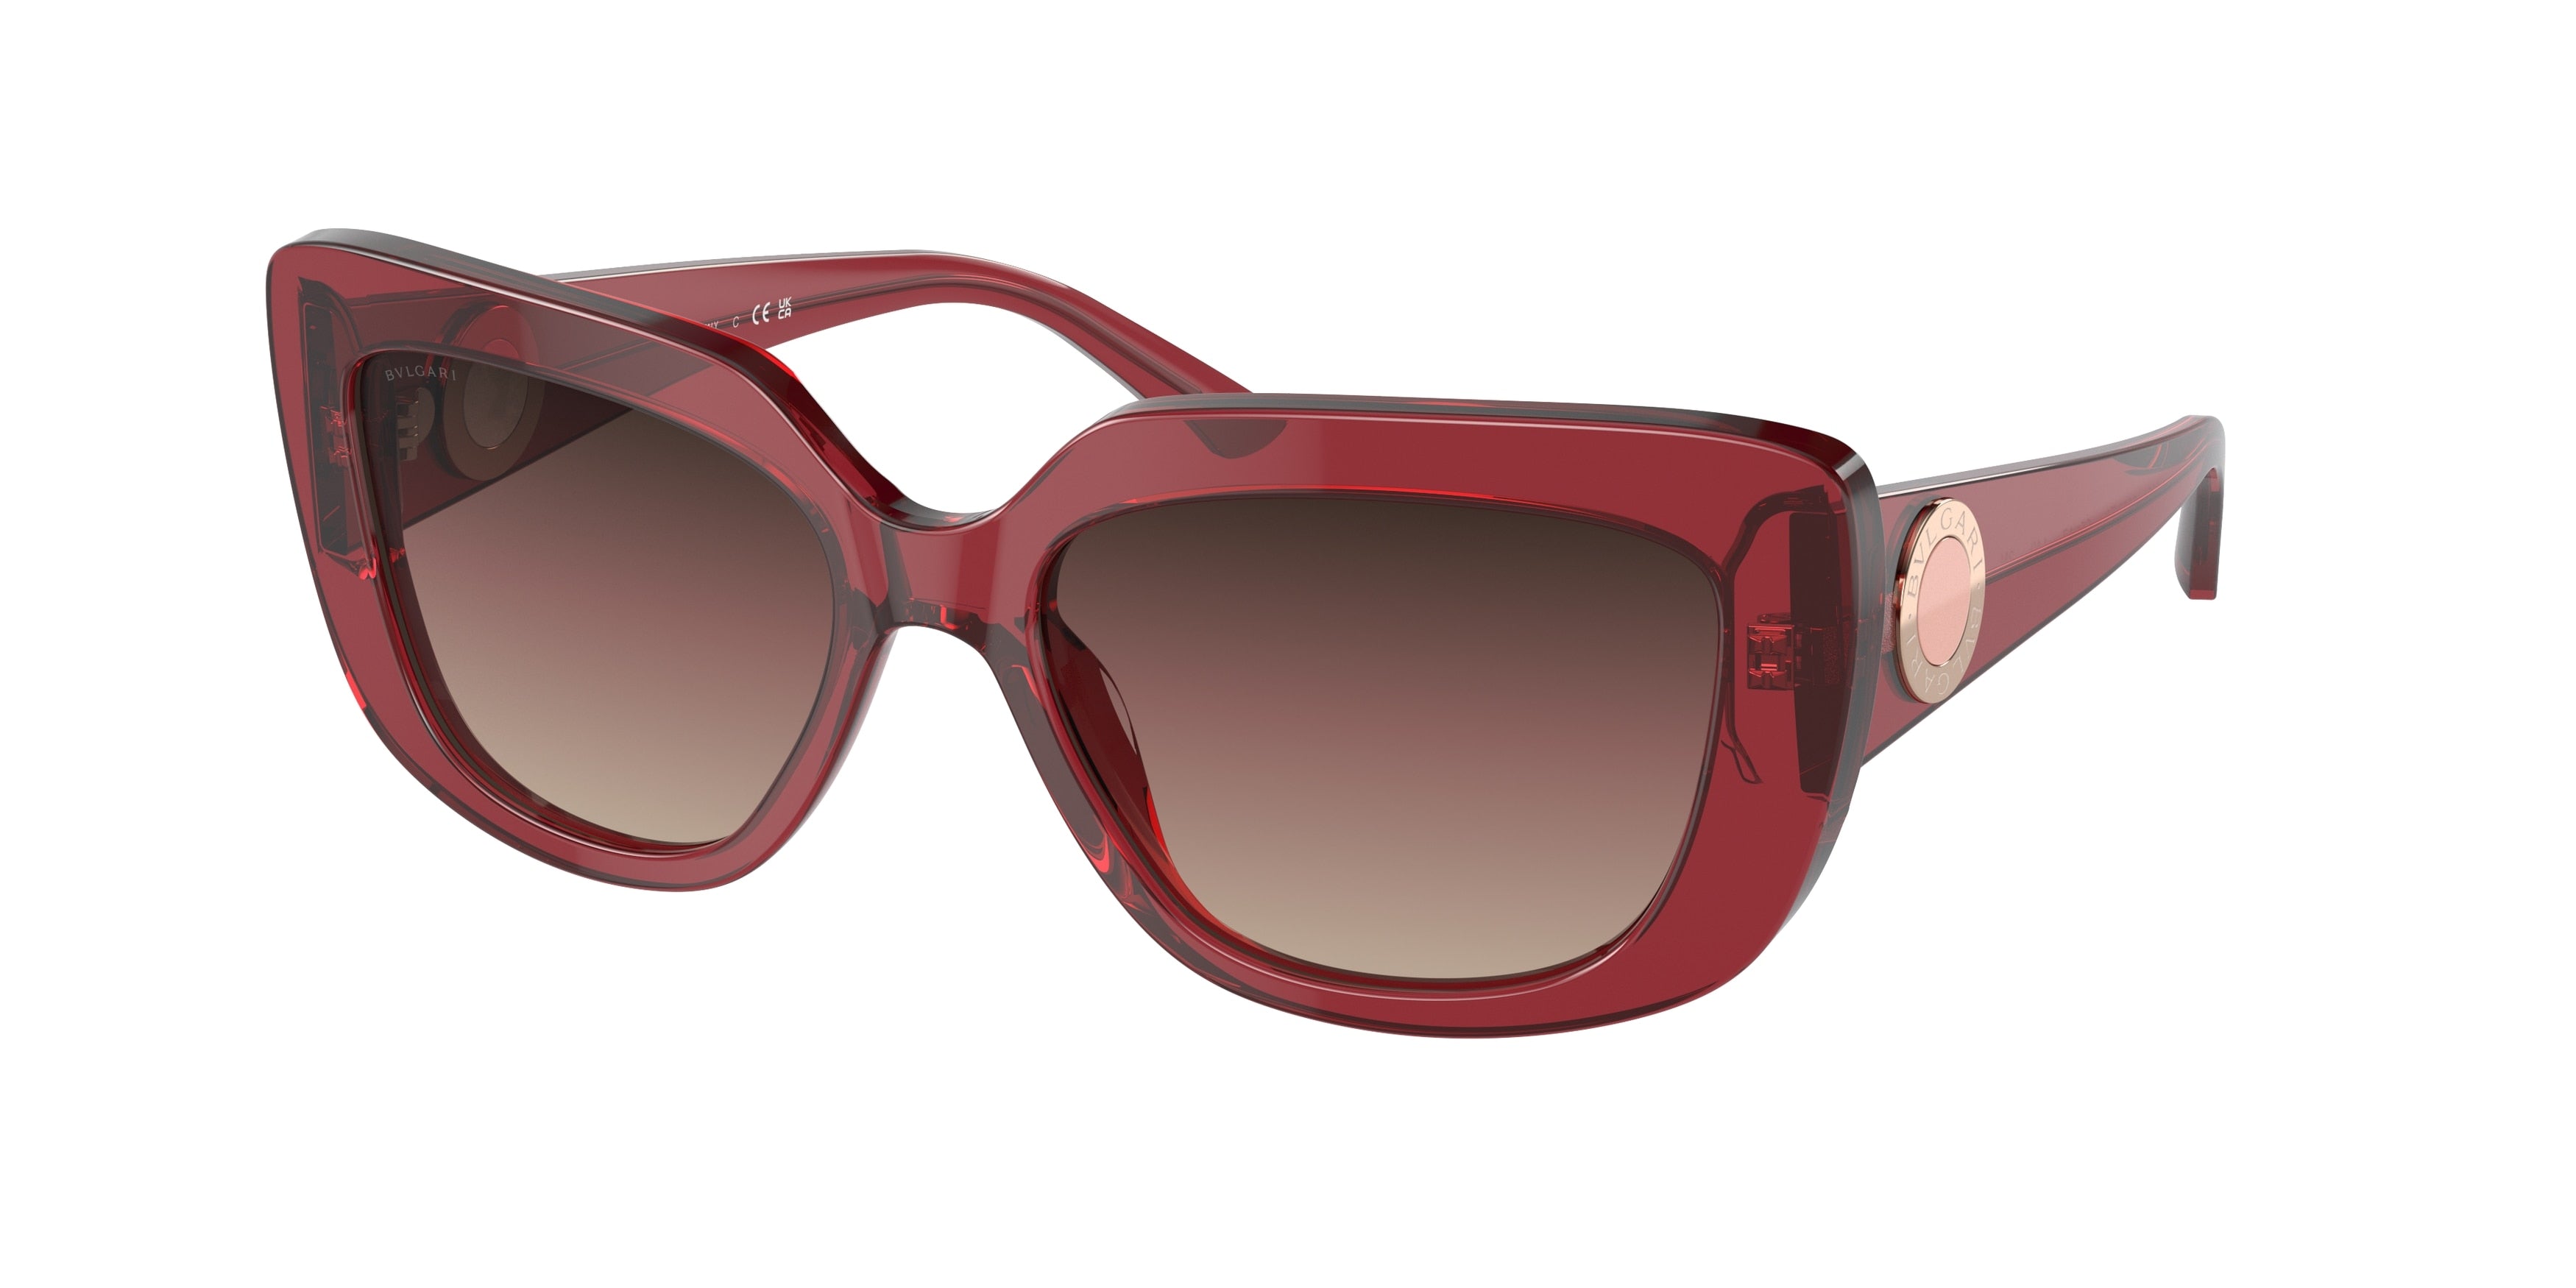 Bvlgari BV8261 Rectangle Sunglasses  5528E2-Transparent Red 55-140-17 - Color Map Red